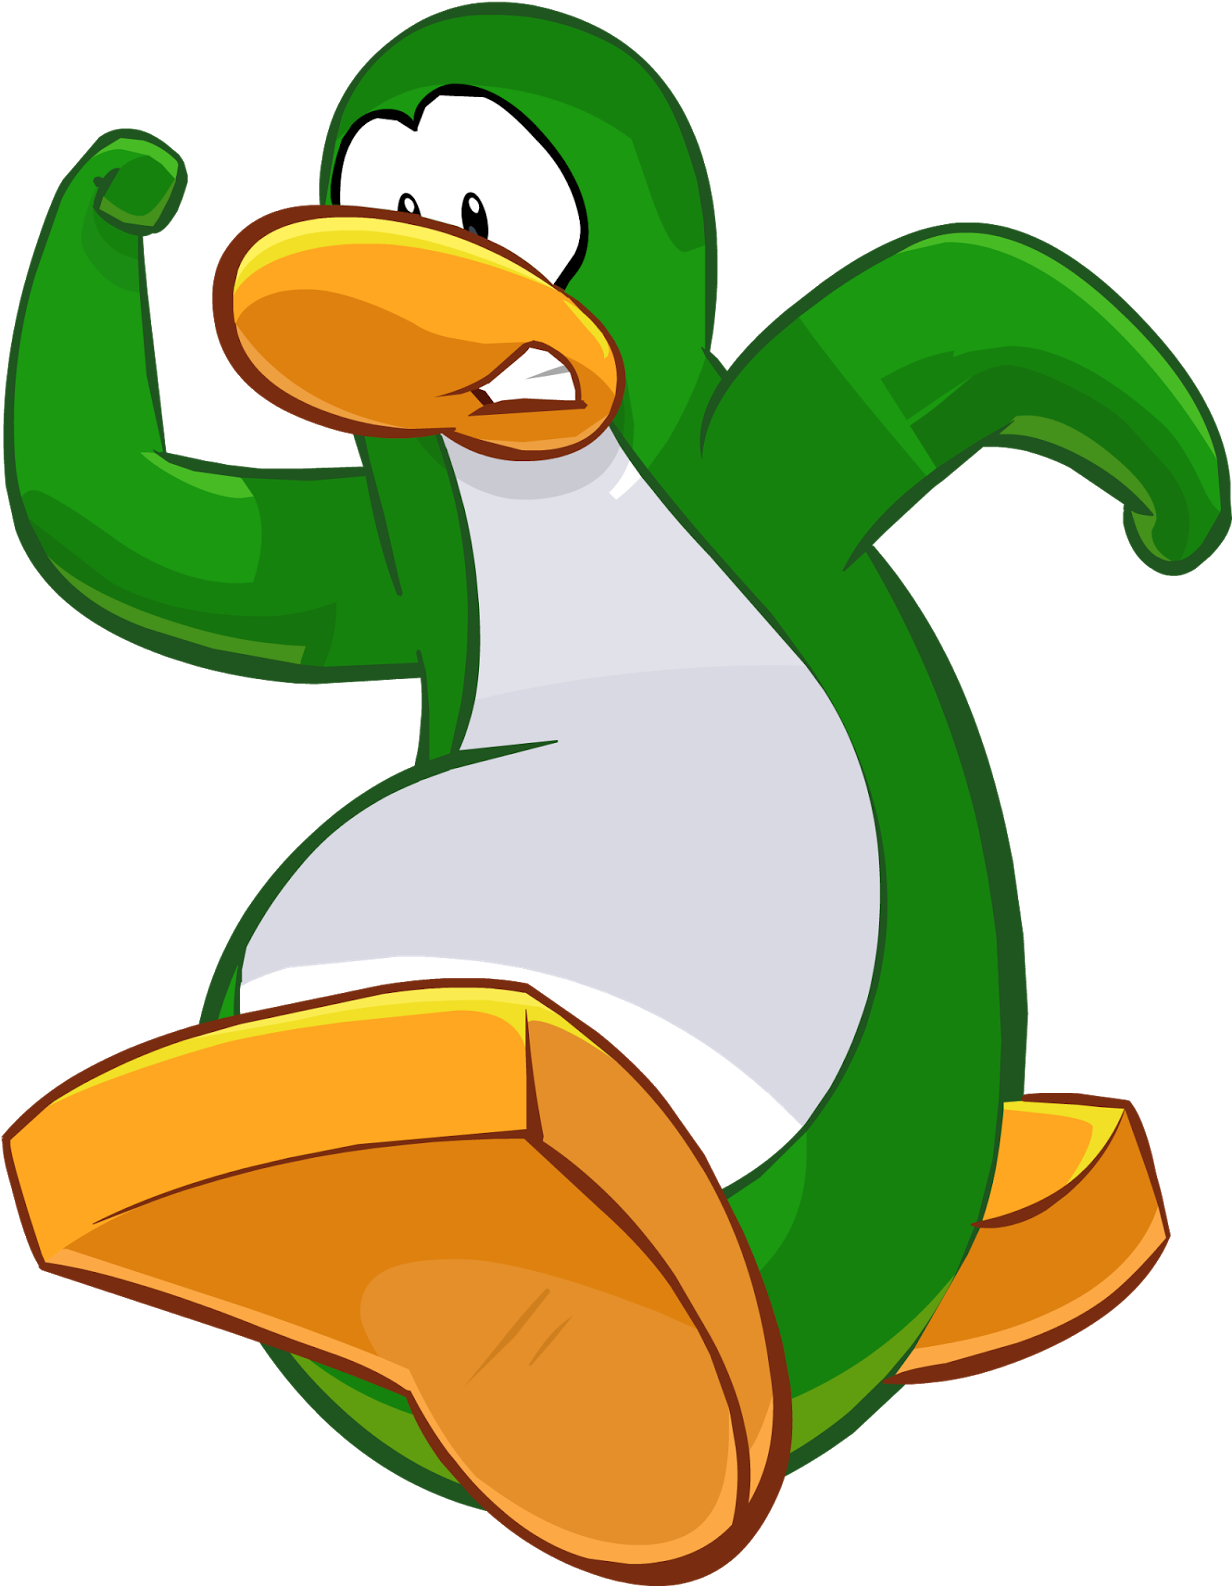 We've Updated Our Cutout Pages With New Hd Cutouts - Club Penguin Aunt Arctic (1231x1600)